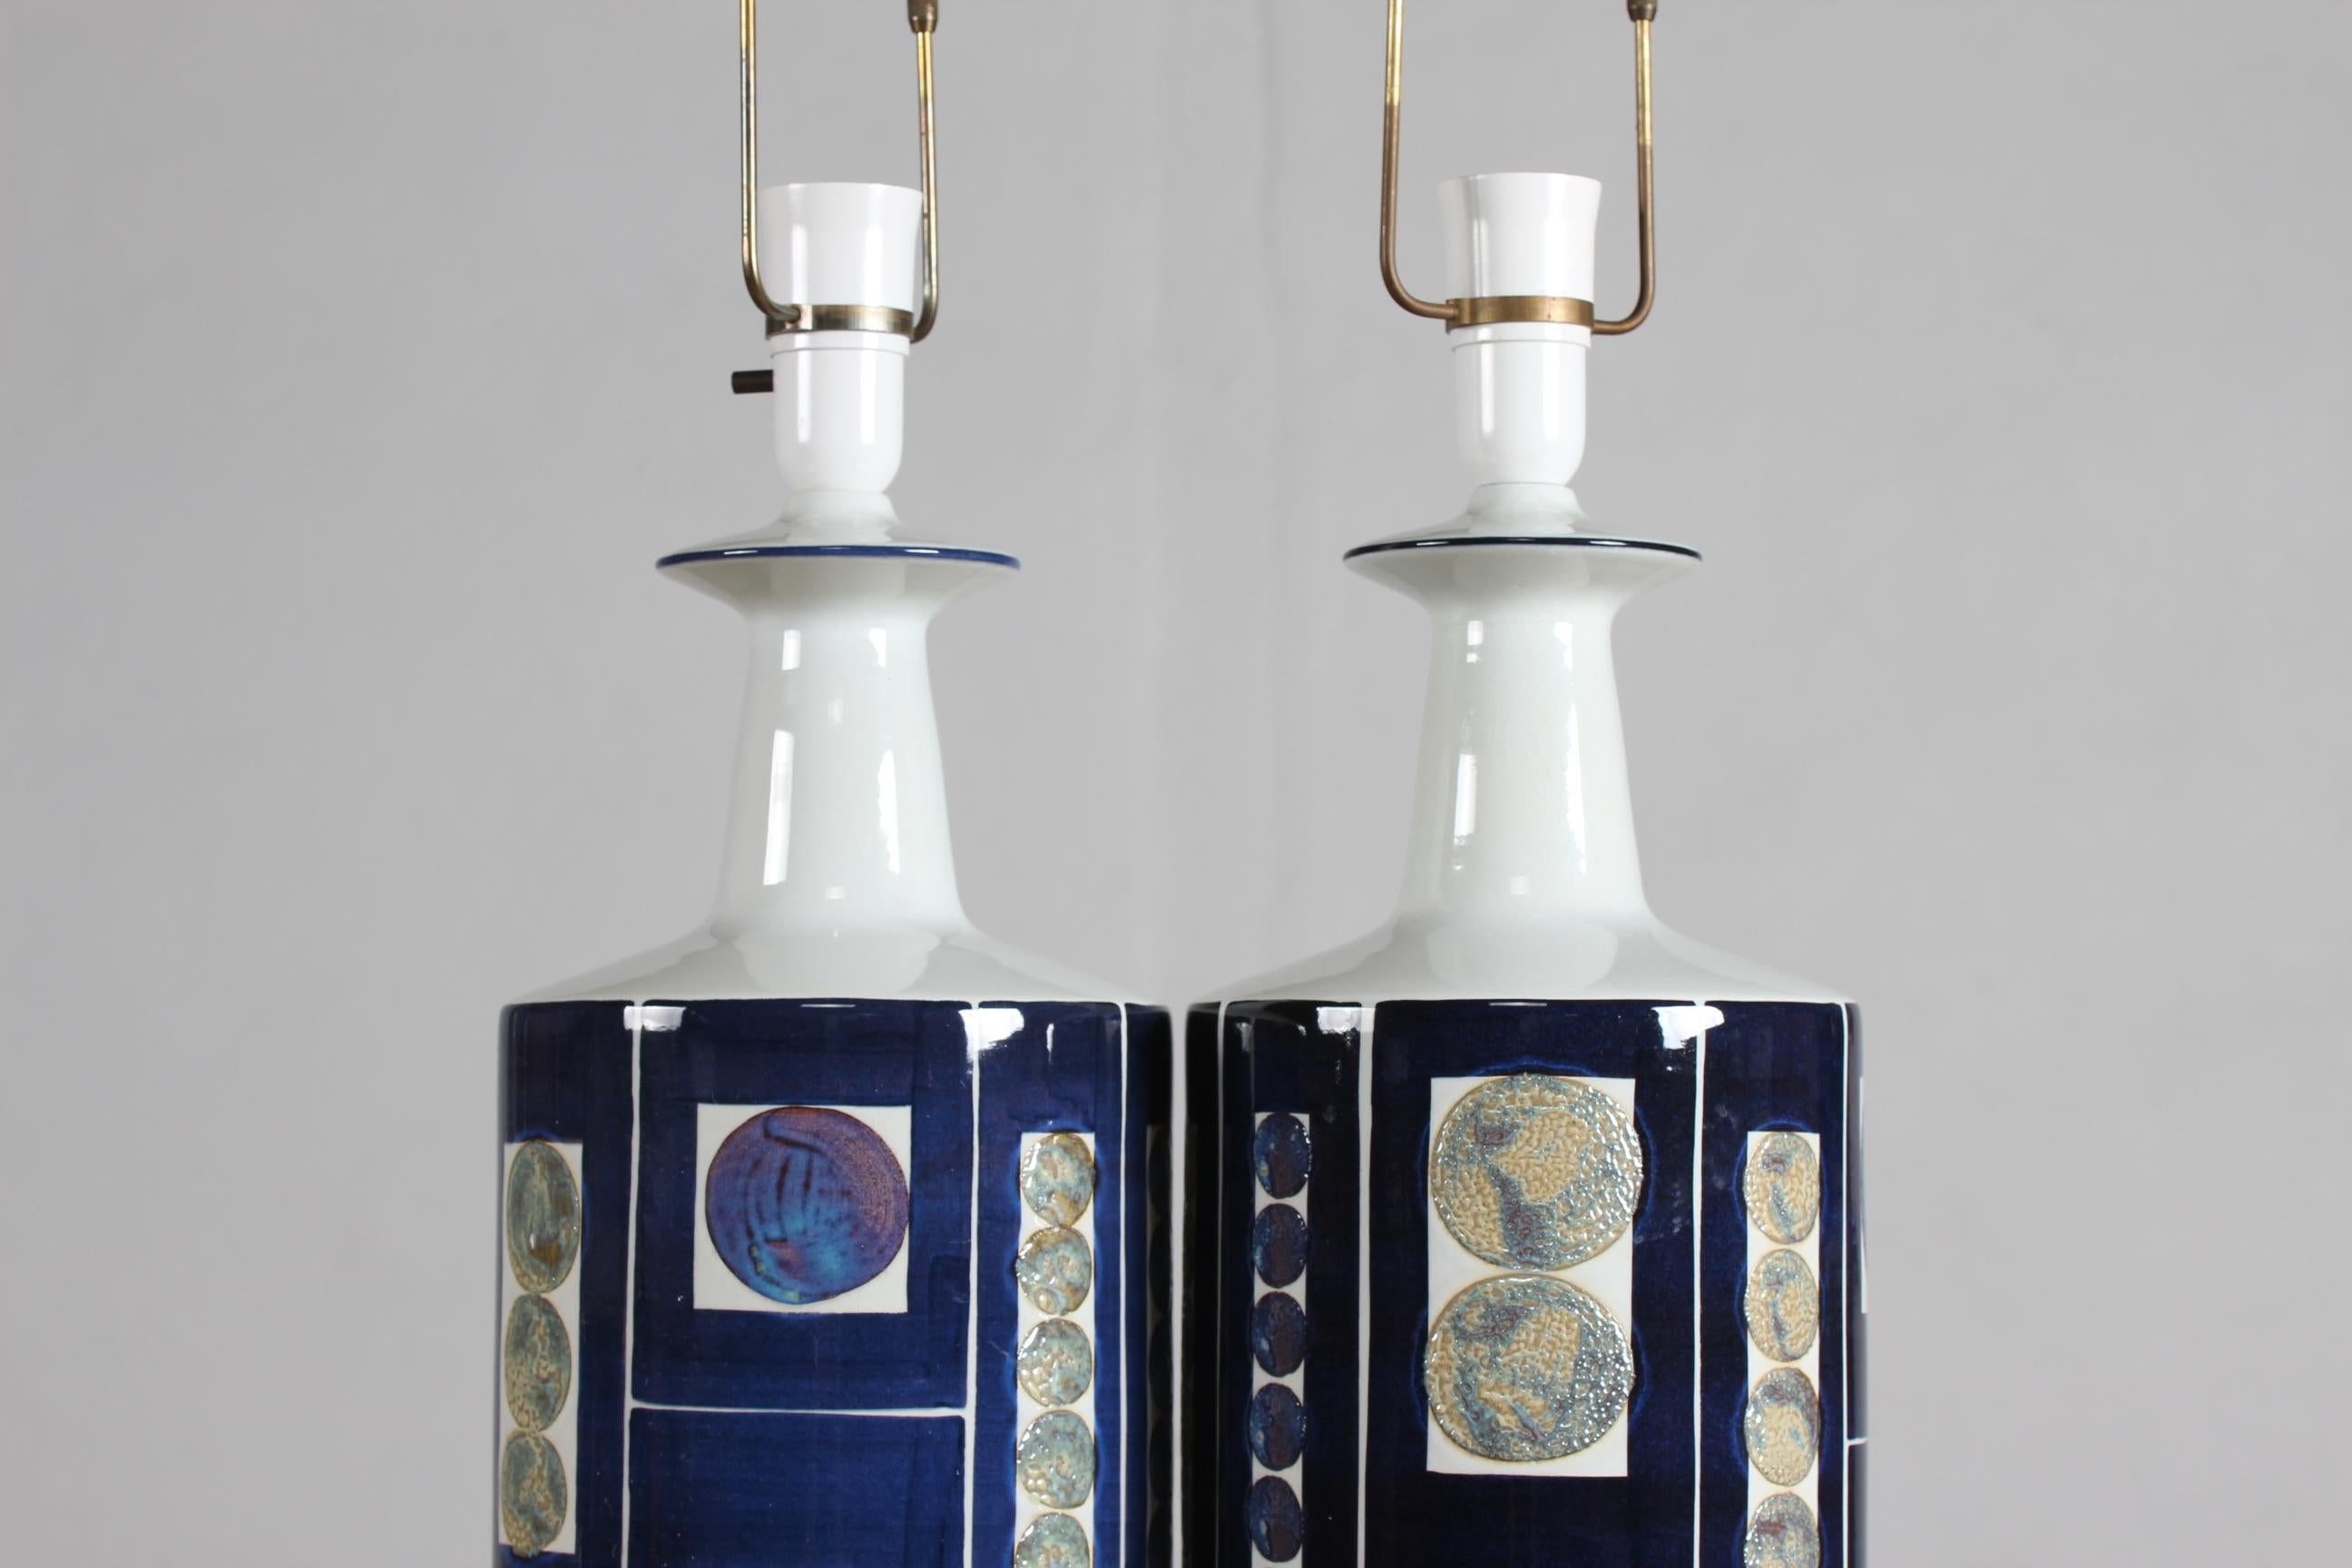 Pair of Aluminia Tall Table Lamps by Inge-Lise Koefoed, Danish Ceramic 1960s For Sale 6